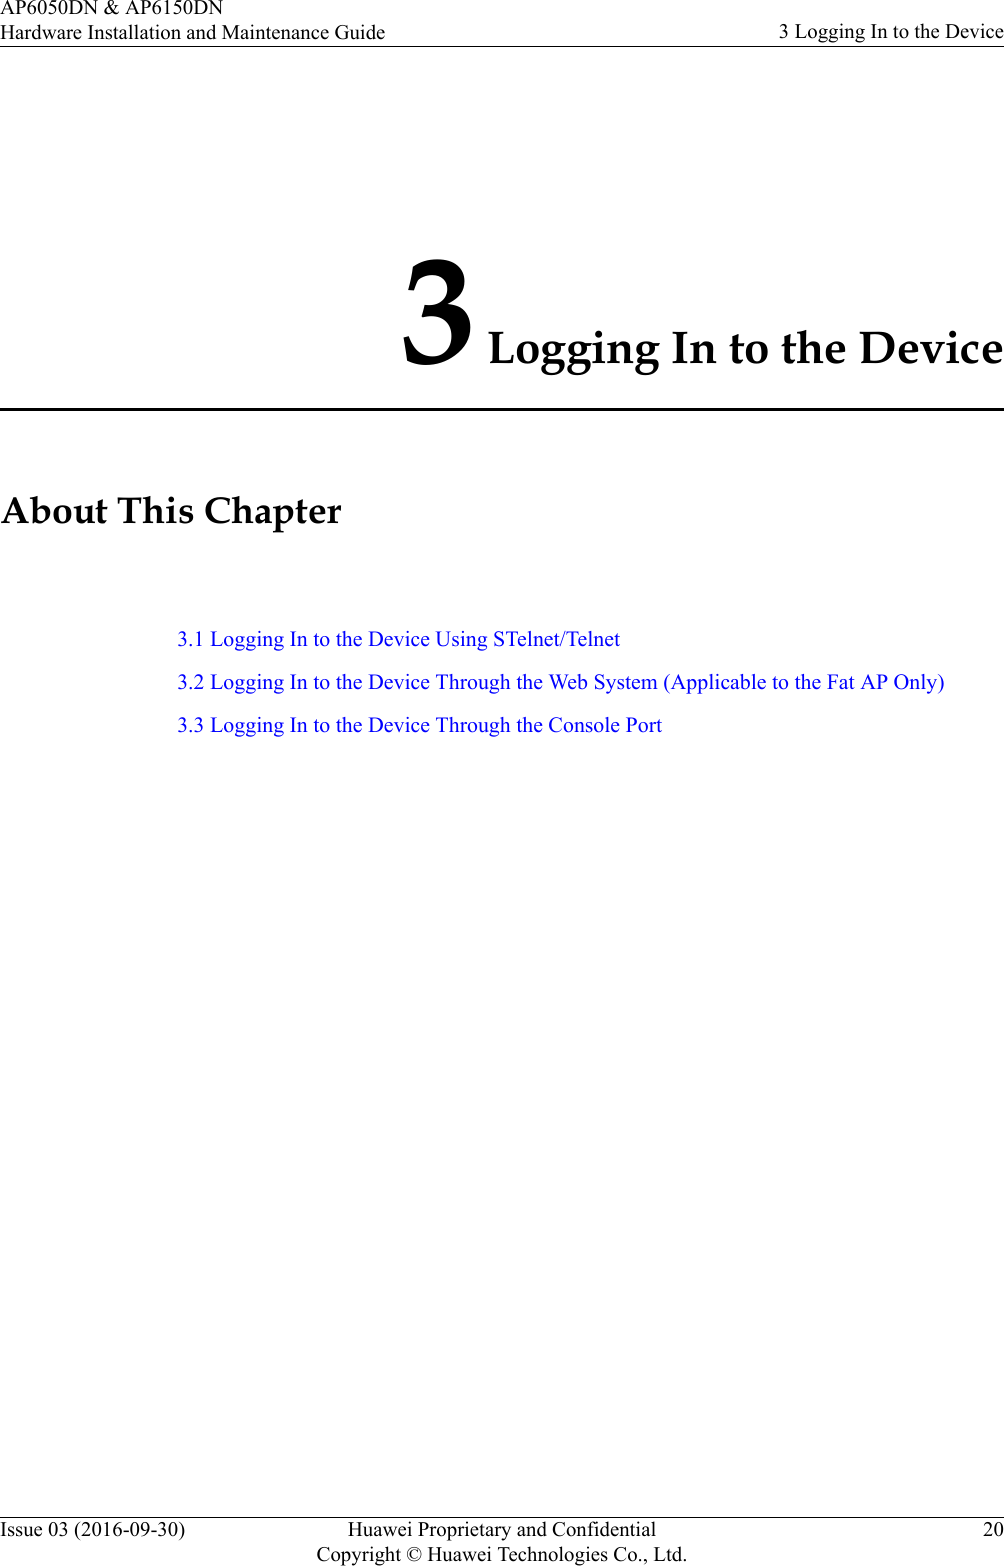 3 Logging In to the DeviceAbout This Chapter3.1 Logging In to the Device Using STelnet/Telnet3.2 Logging In to the Device Through the Web System (Applicable to the Fat AP Only)3.3 Logging In to the Device Through the Console PortAP6050DN &amp; AP6150DNHardware Installation and Maintenance Guide 3 Logging In to the DeviceIssue 03 (2016-09-30) Huawei Proprietary and ConfidentialCopyright © Huawei Technologies Co., Ltd.20